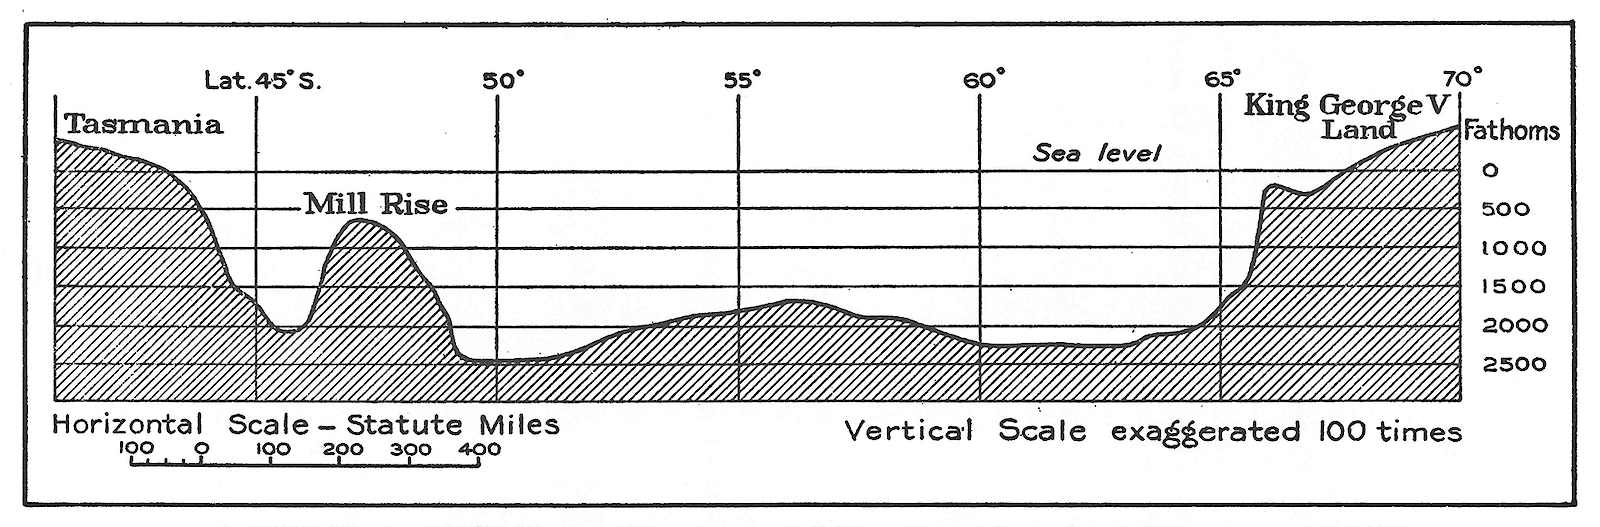 A section diagram of the floor of the Southern Ocean between Tasmania and King George V Land.